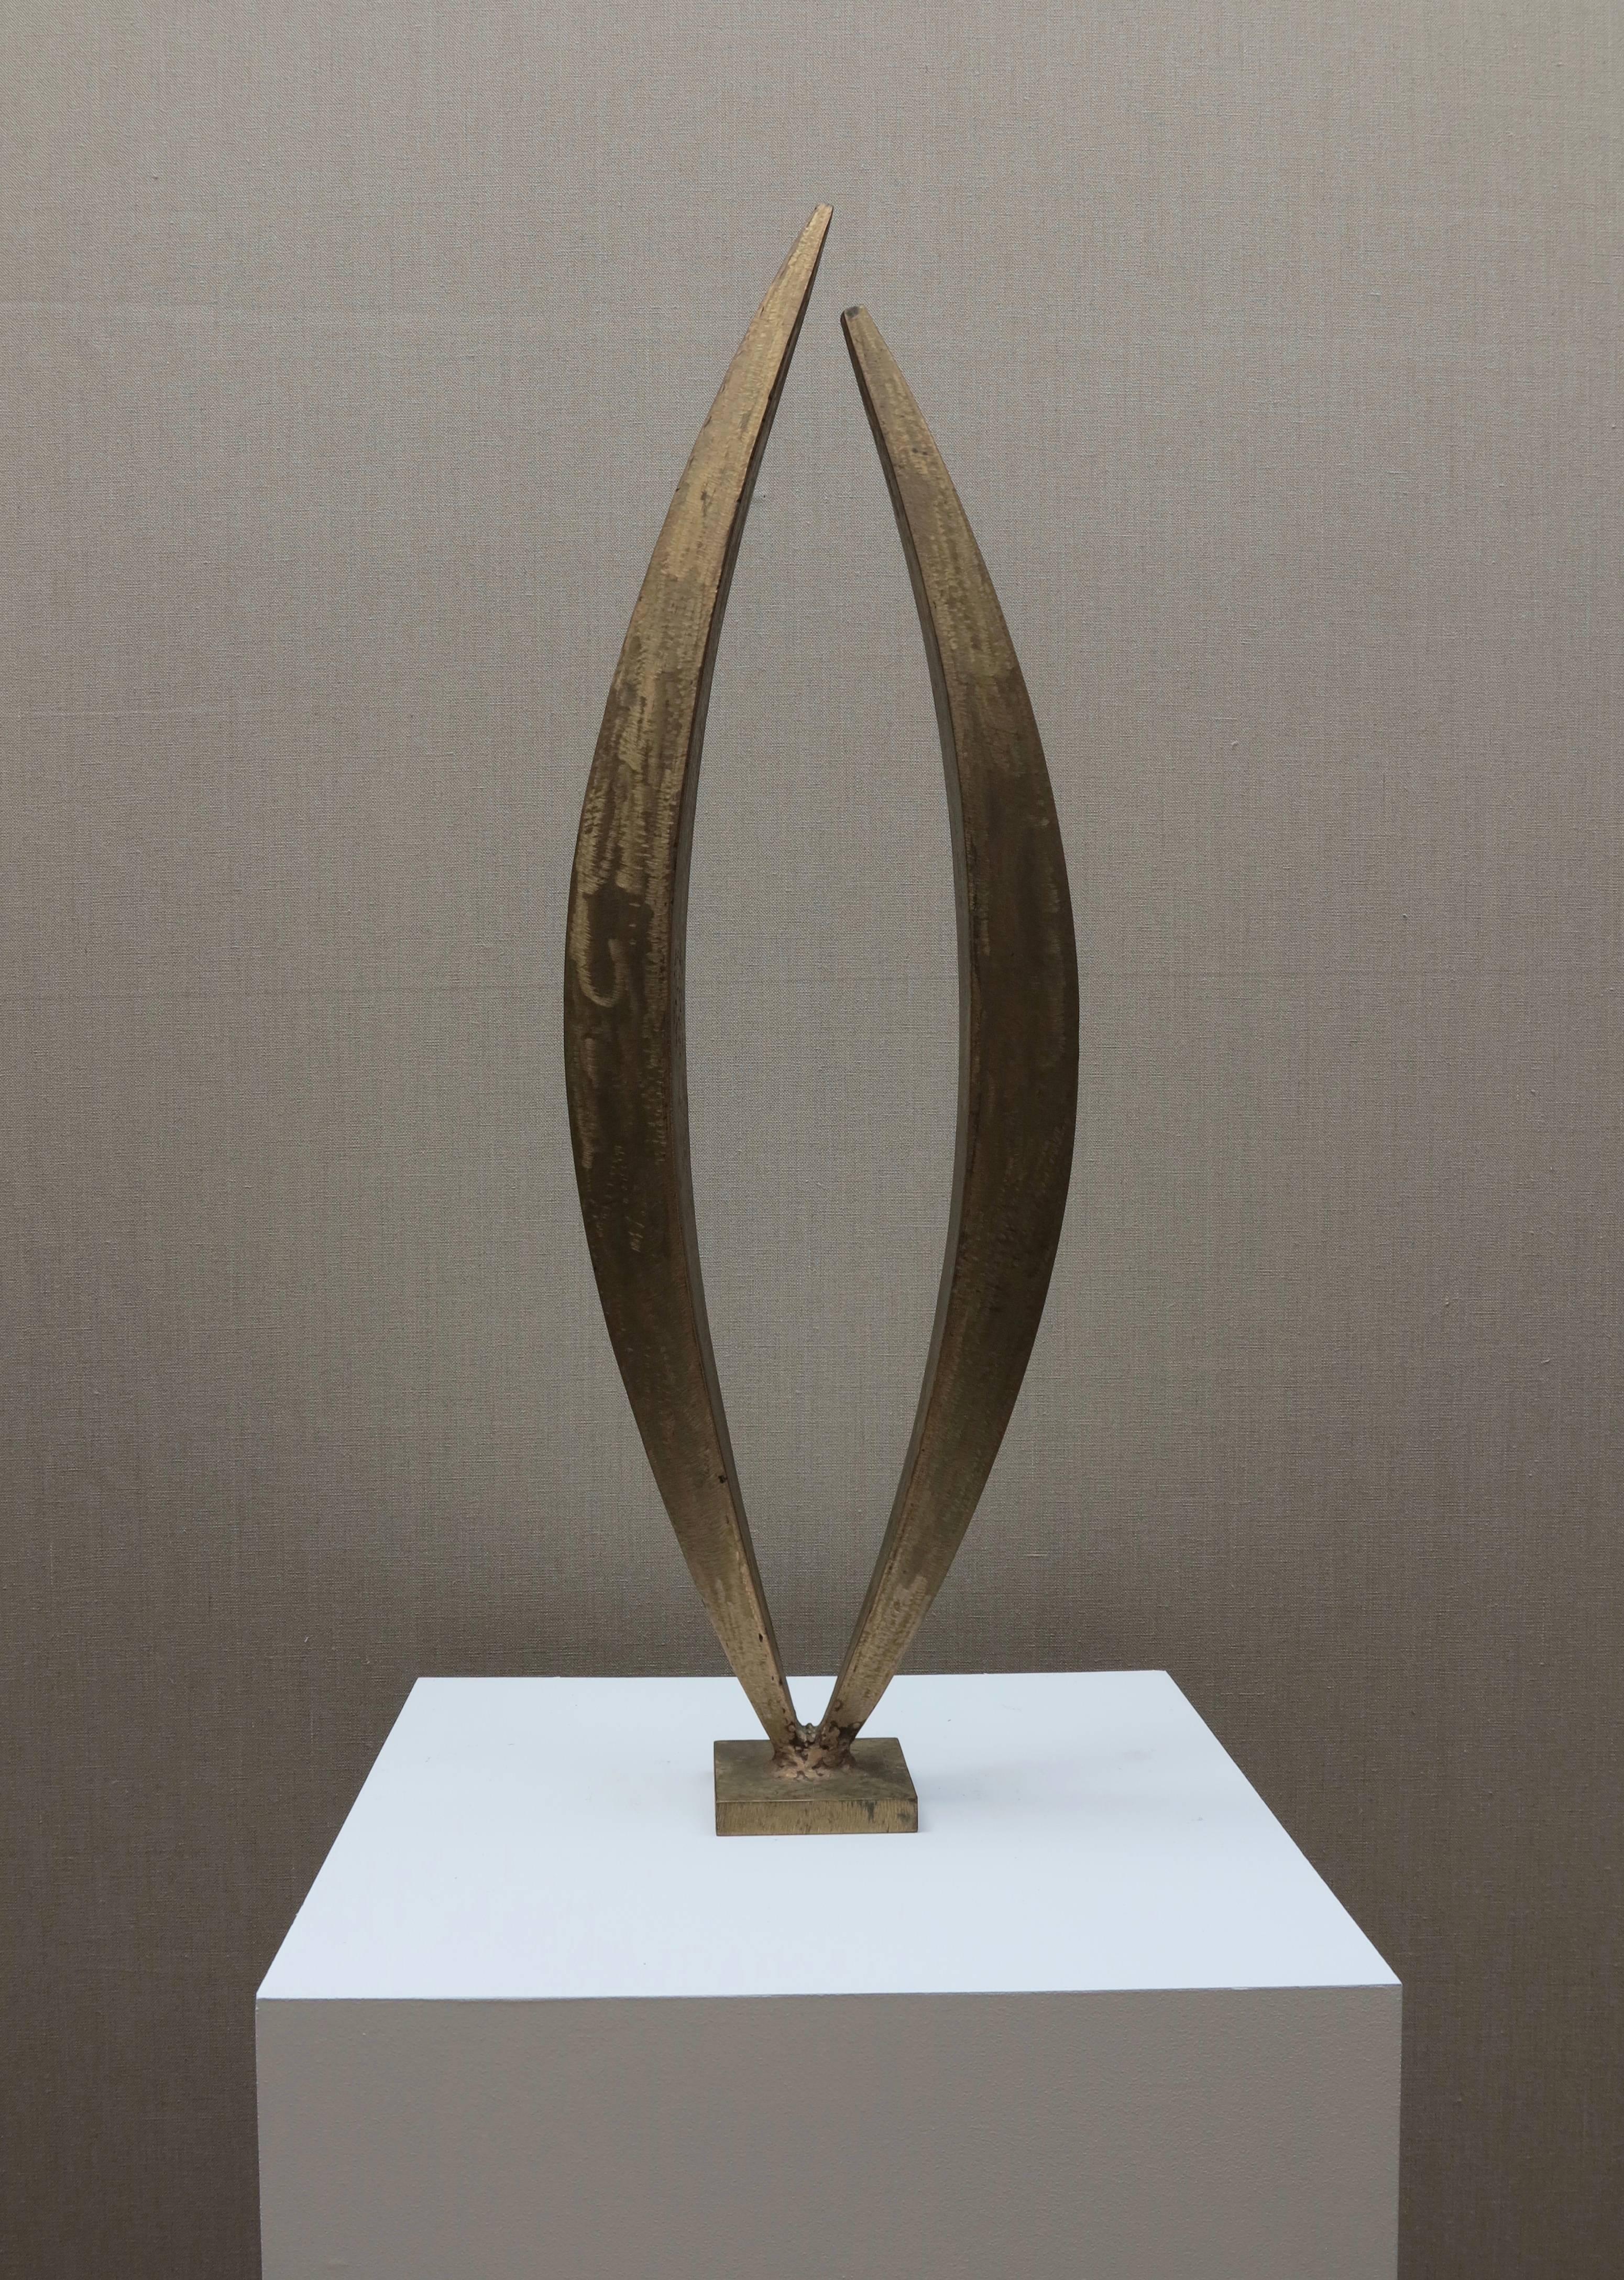 Untitled (abstract bronze sculpture) - Sculpture by Raymond Granville Barger